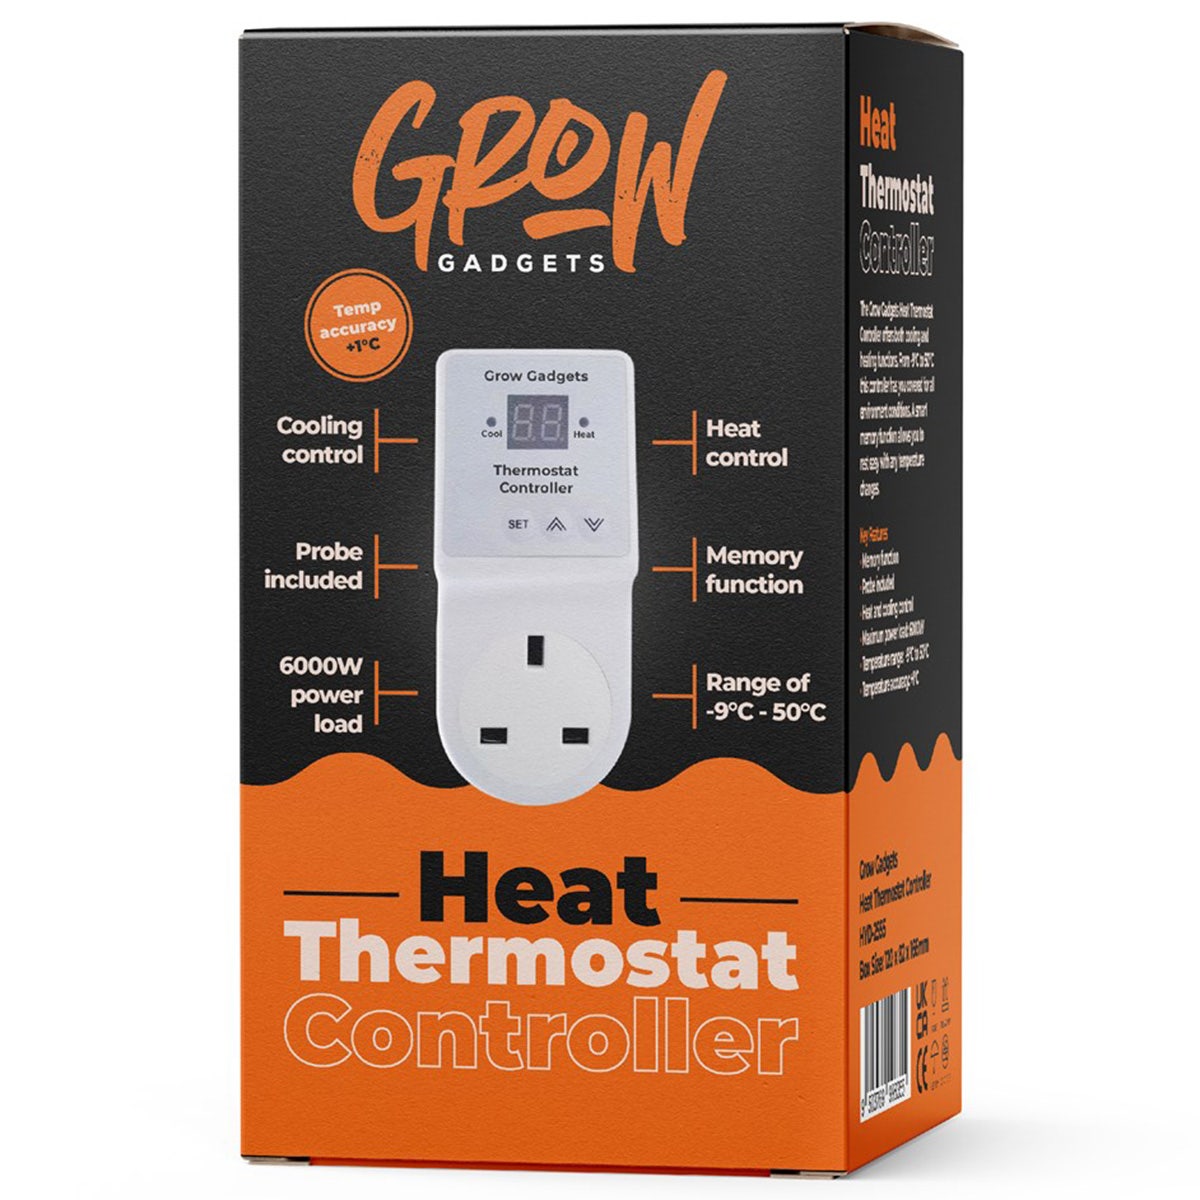 Grow Gadgets - Thermostat Controller